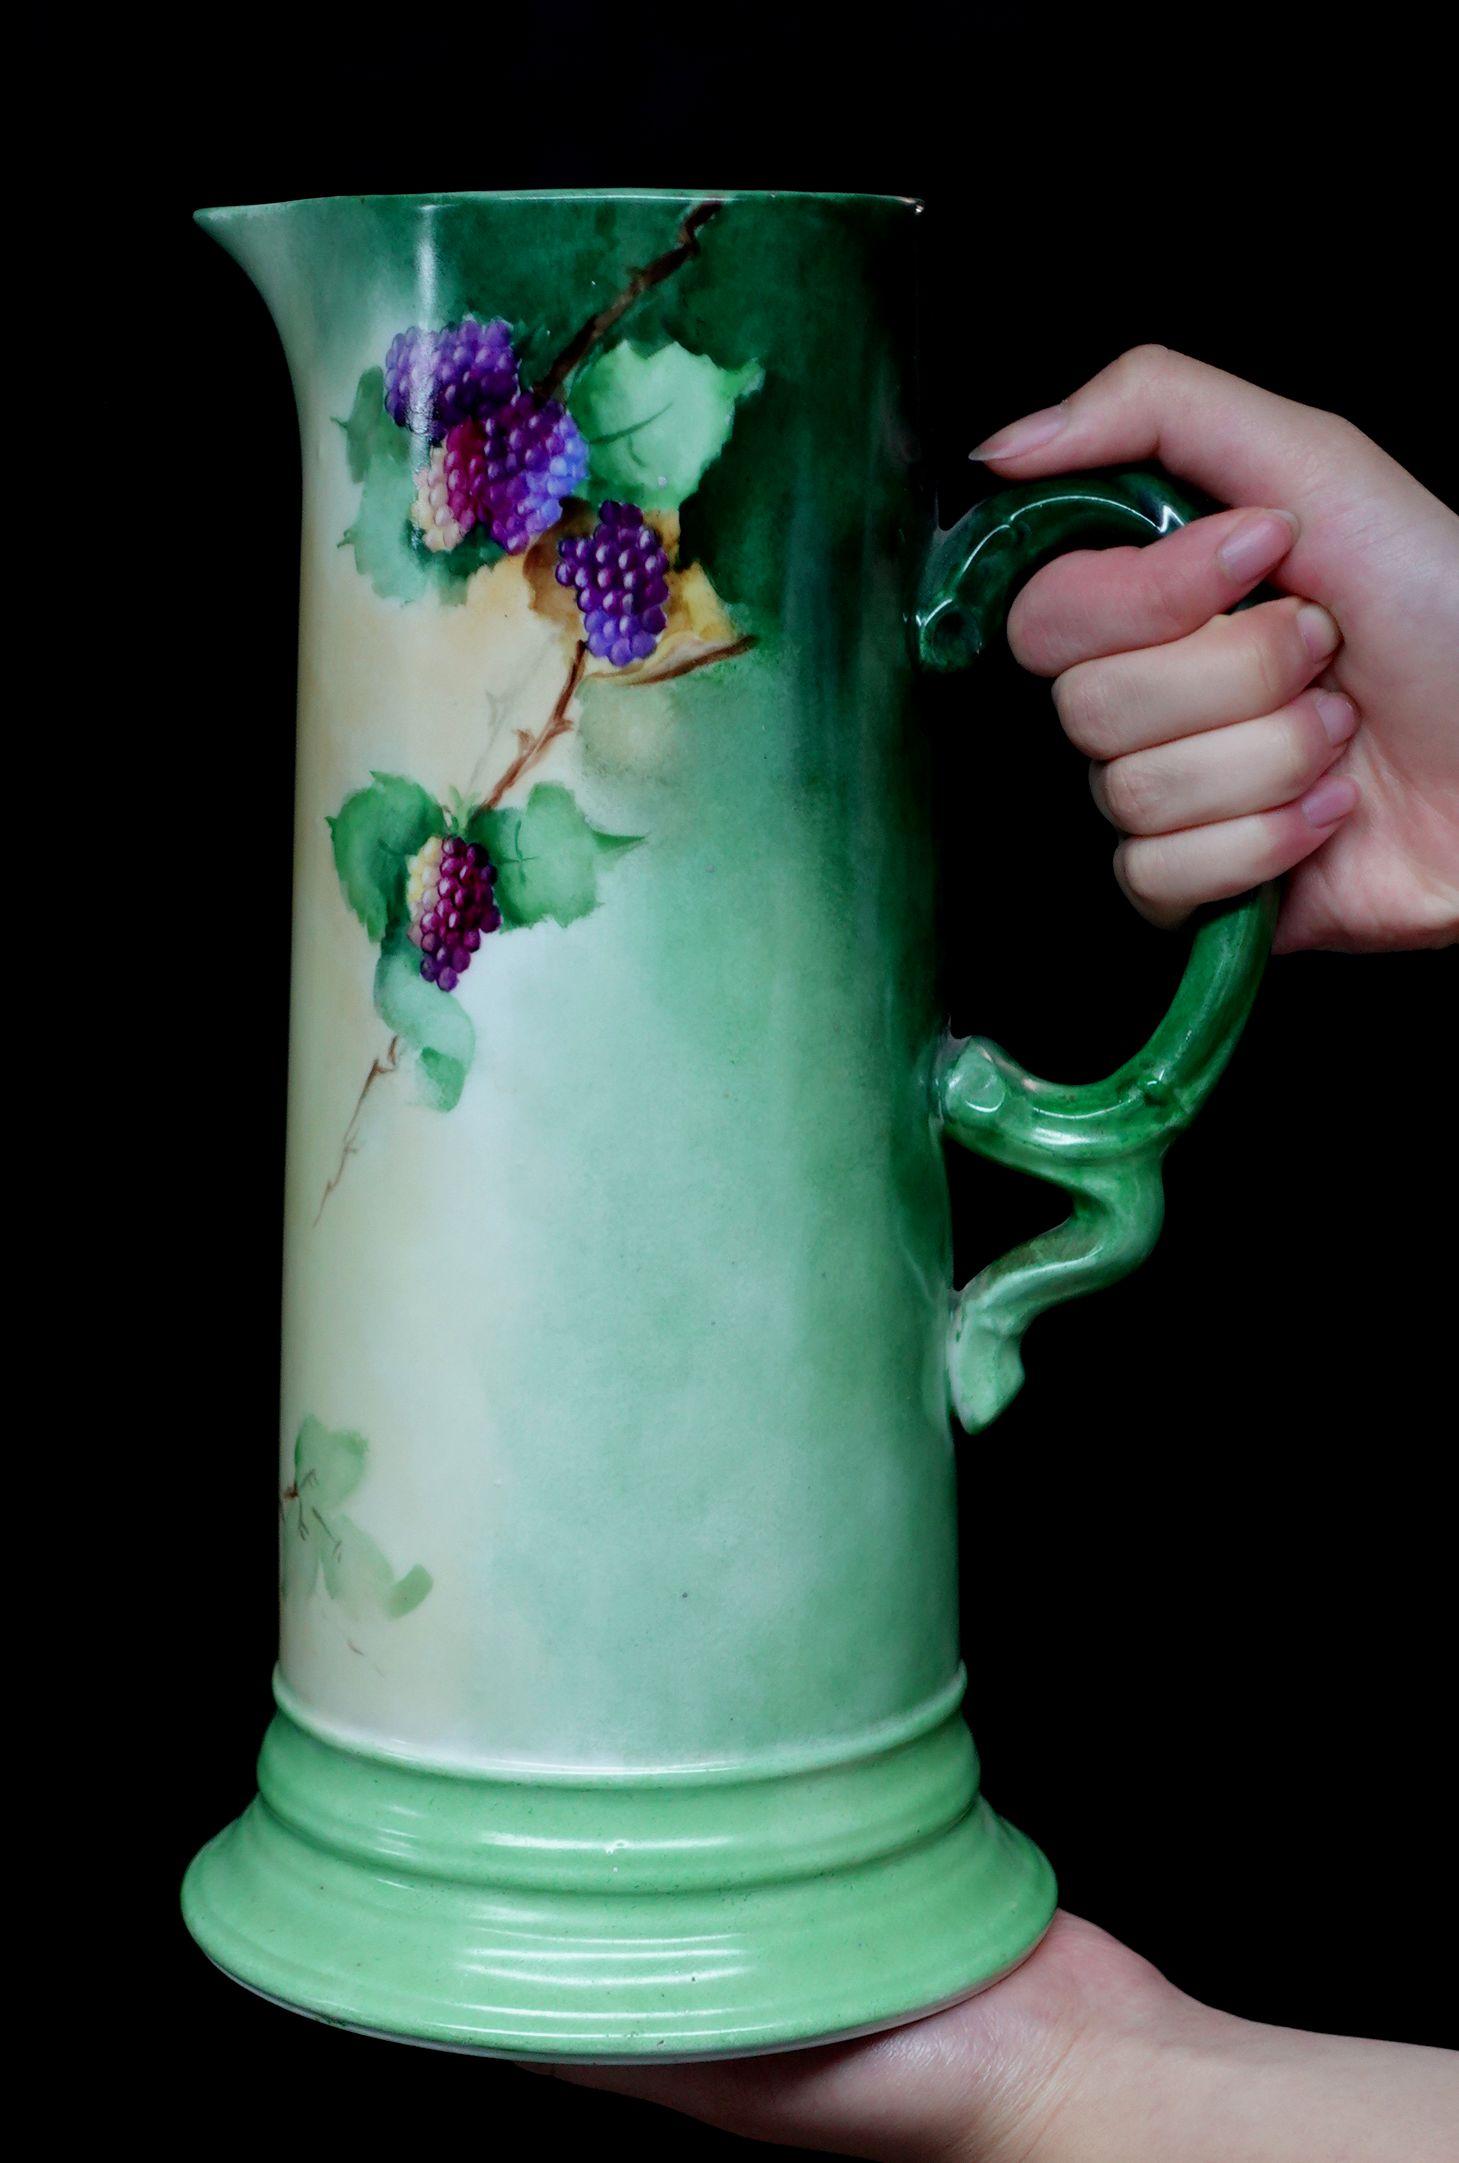 A wonderful antique large antique J.P. French floral porcelain decorated tankard offers a curve-shaped rim absolutely 100% hand-painted grapes in red, brown-red, purple, and rich green leaves, delicate arrangement of the composition, light and heavy